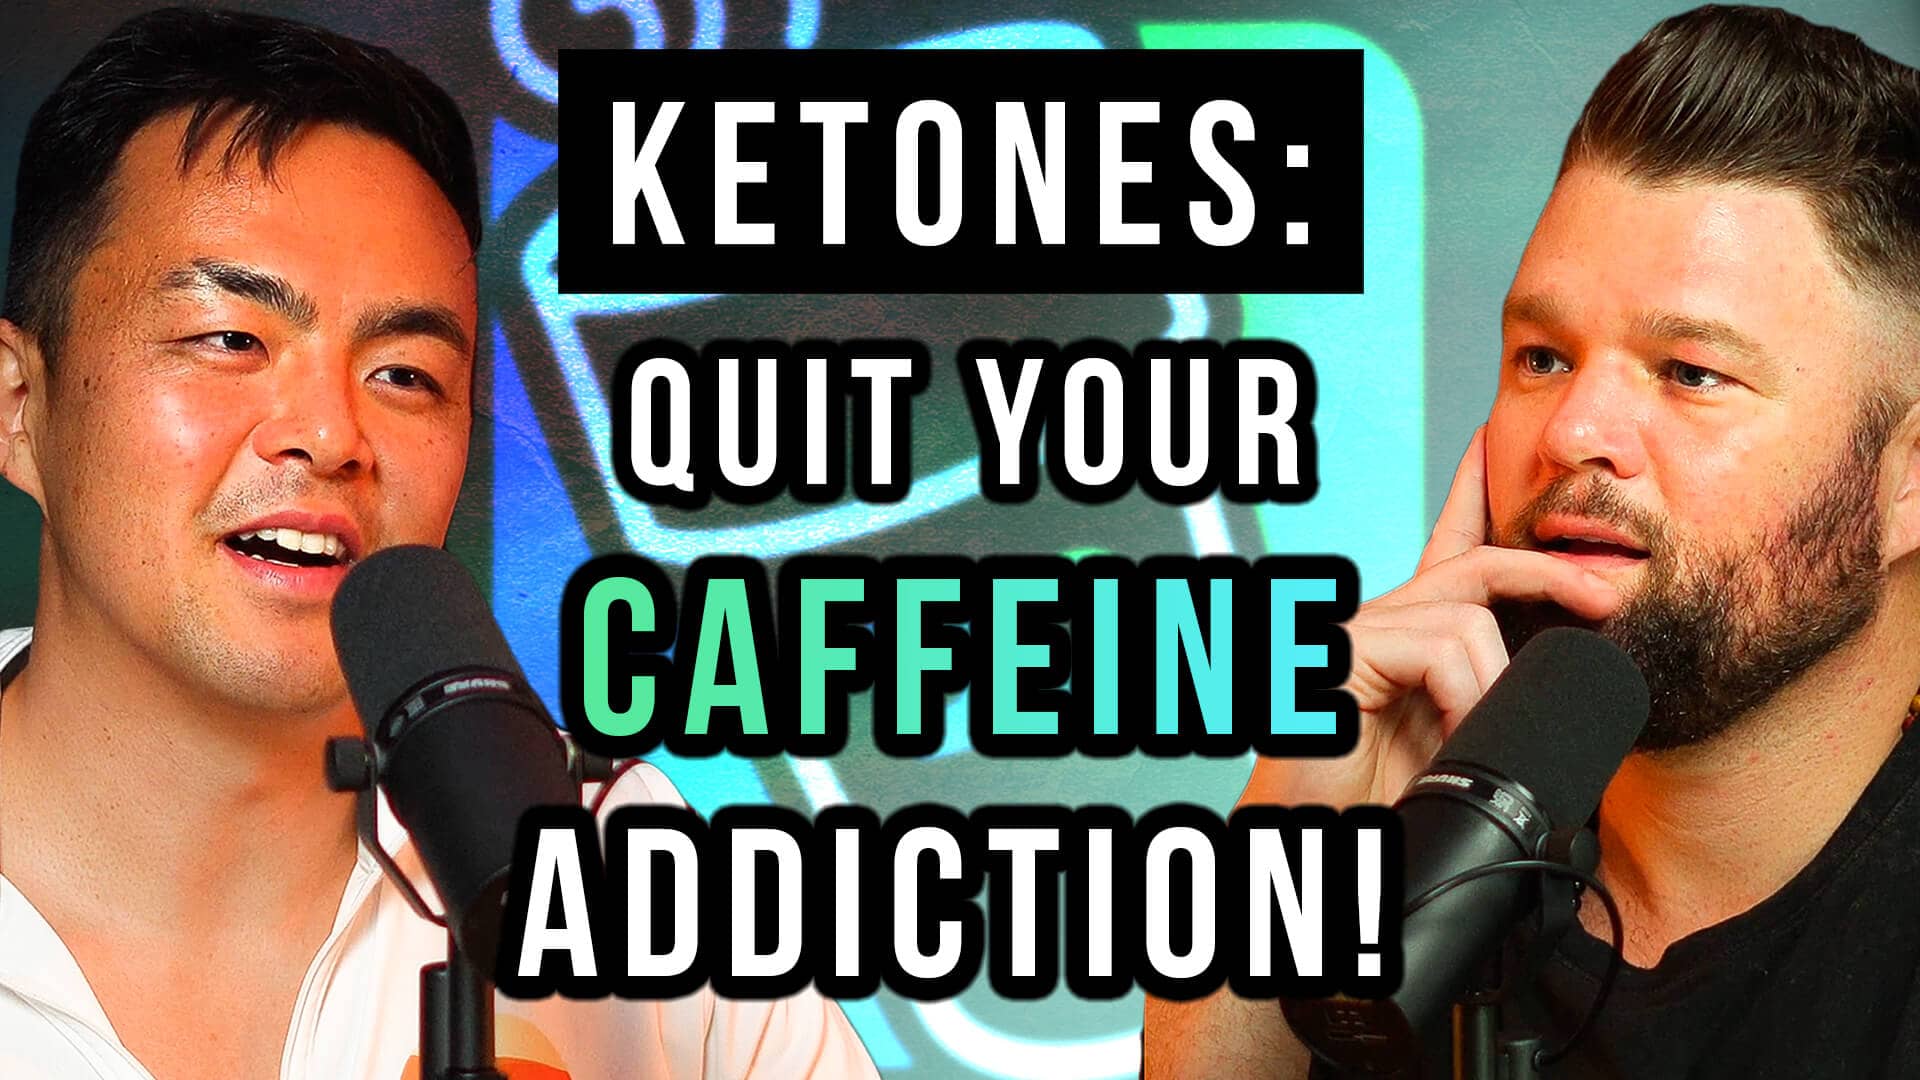 Geoffrey Woo | Macronutrient Masterclass: Ketones As The "4th Macro" For Appetite Suppression, Fat Loss + Energy To Quit Caffeine